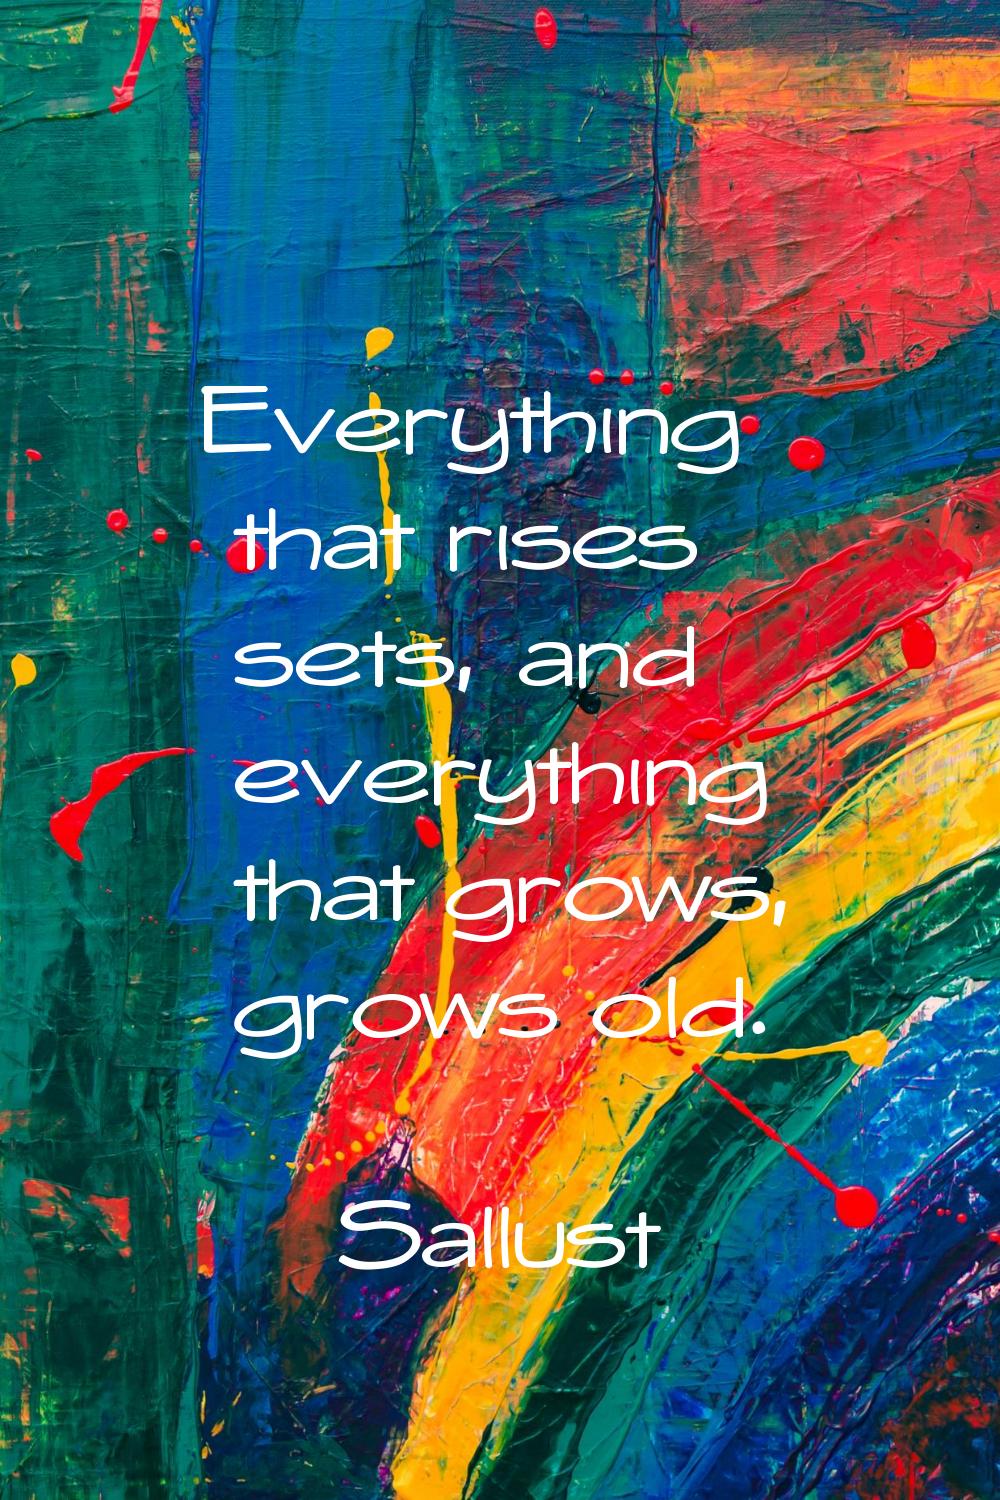 Everything that rises sets, and everything that grows, grows old.